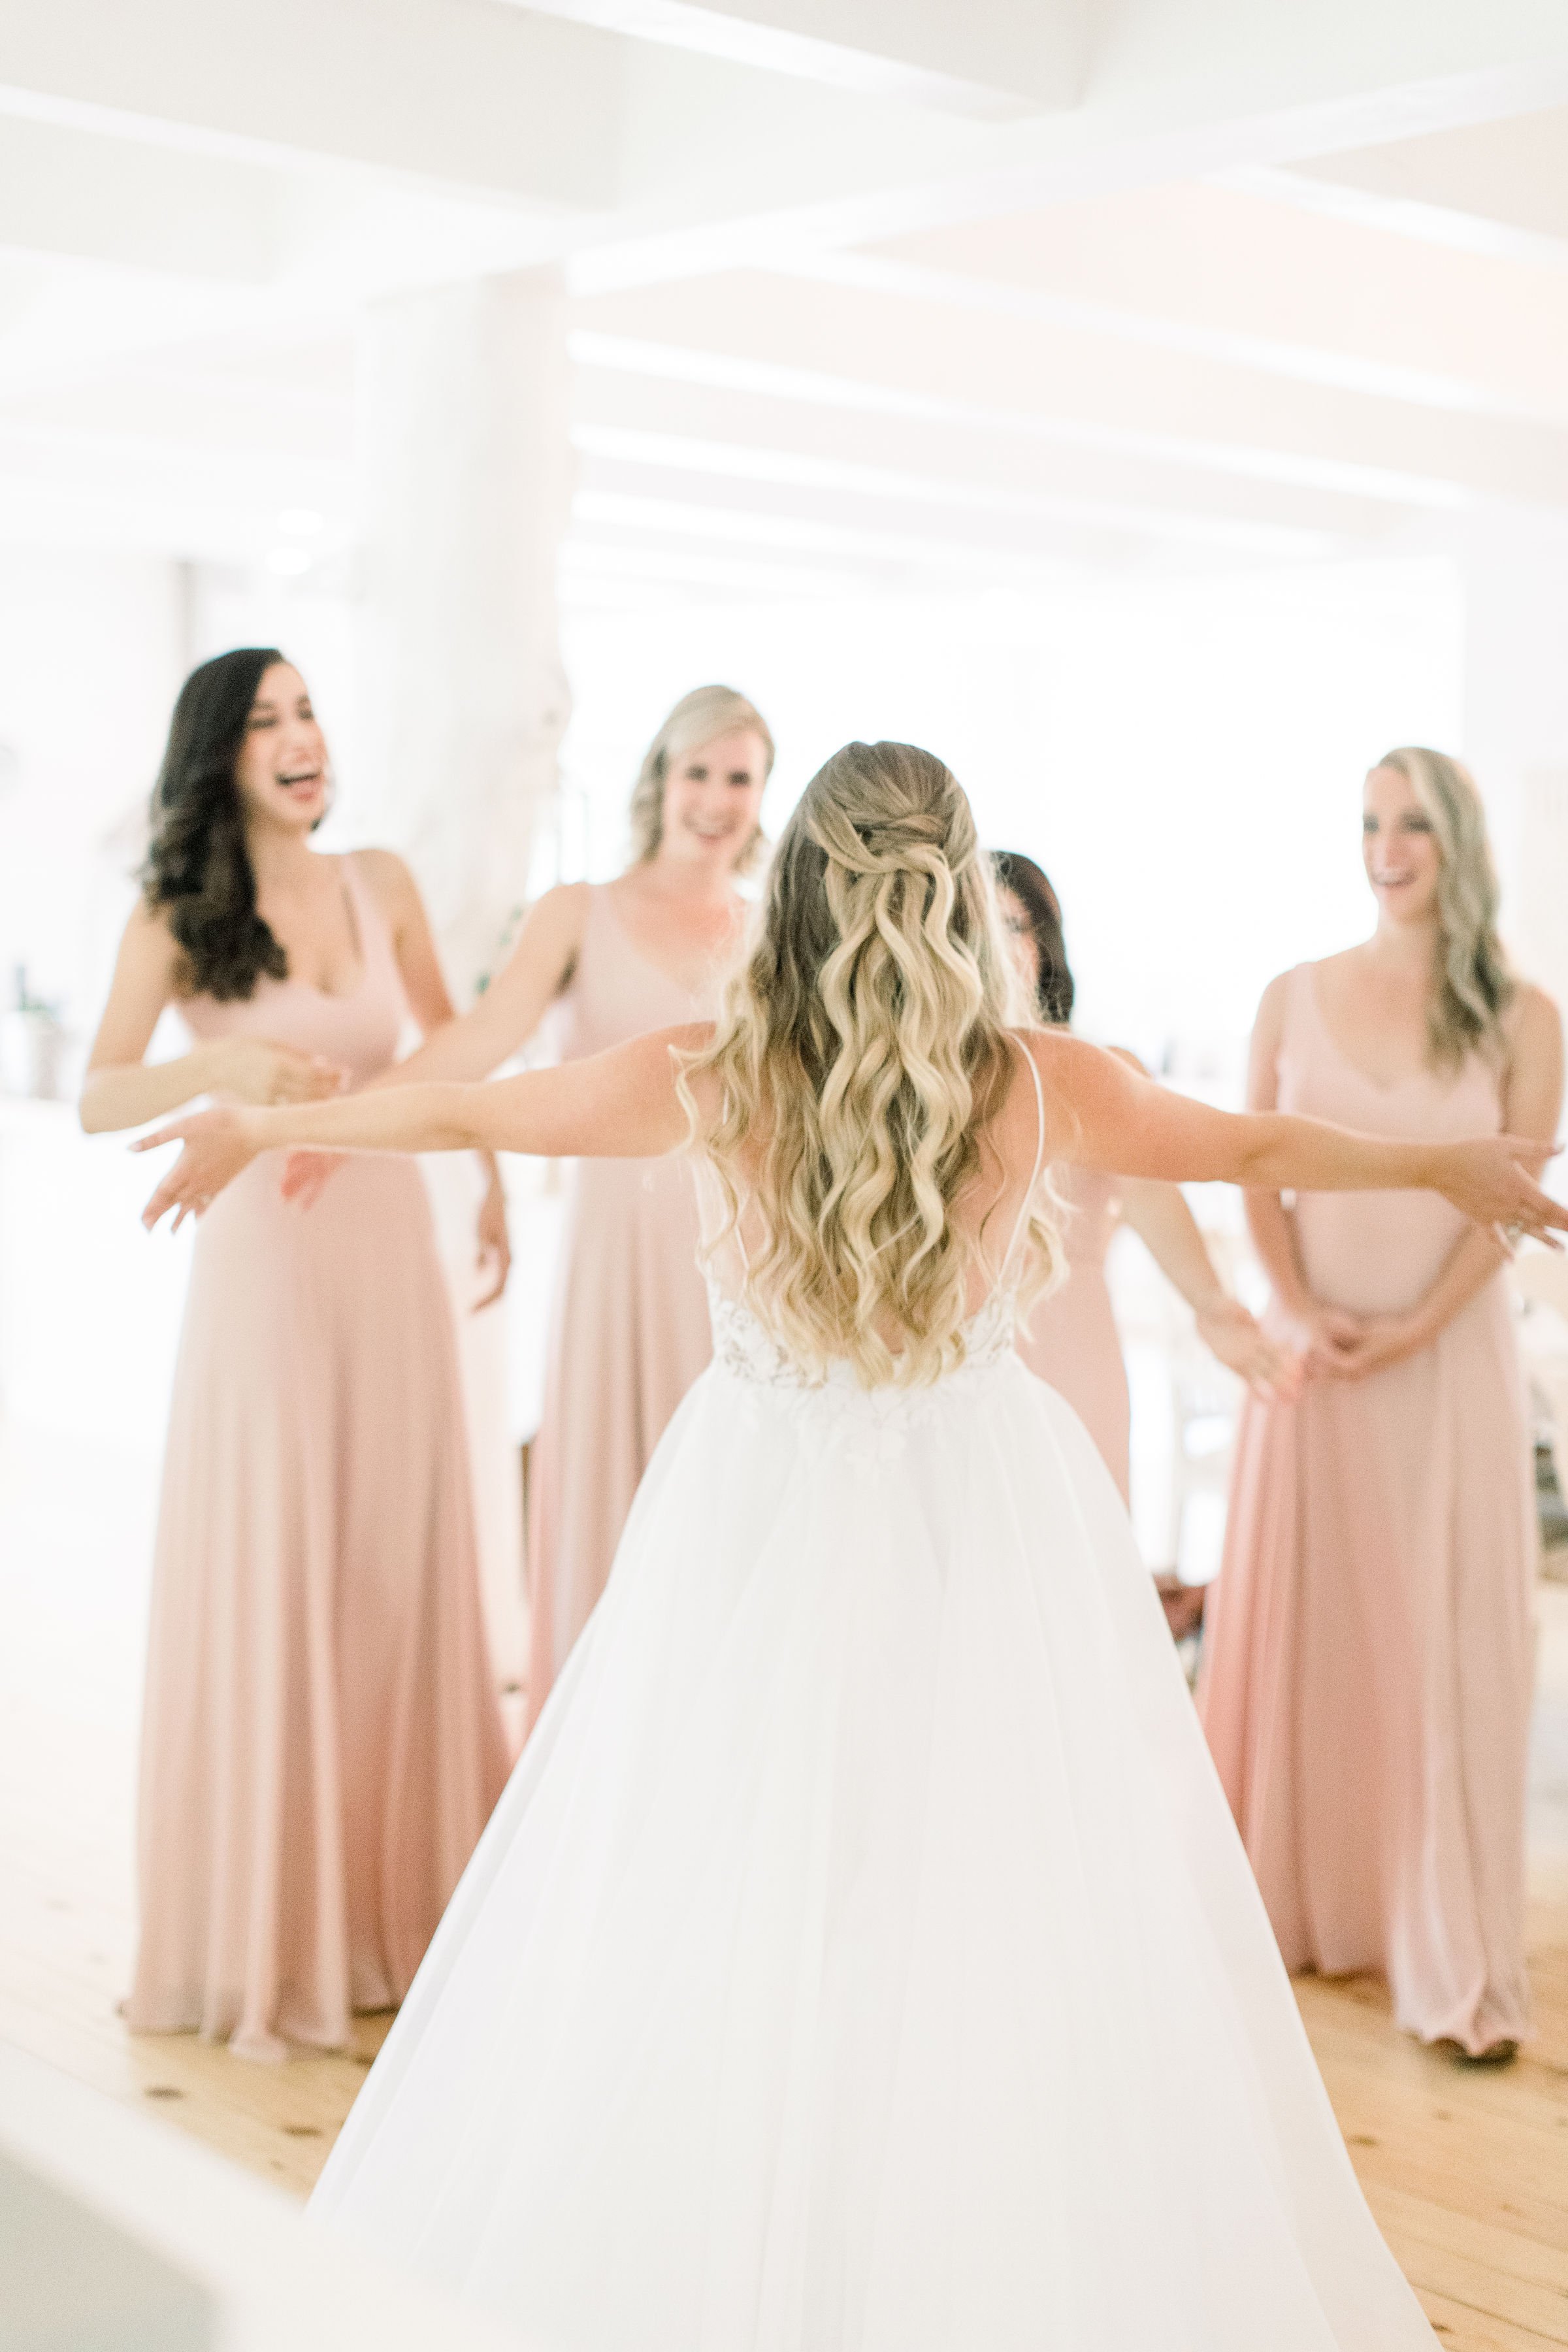  A bride shares a first look with her bridesmaids as they go in for a hug by Chelsea Mason Photography. hug the bridesmaids first look #Quebecweddings #elegantoutdoorwedding #Quebecweddingphotographers #Chelseamasonphotography #Chelseamasonweddings 